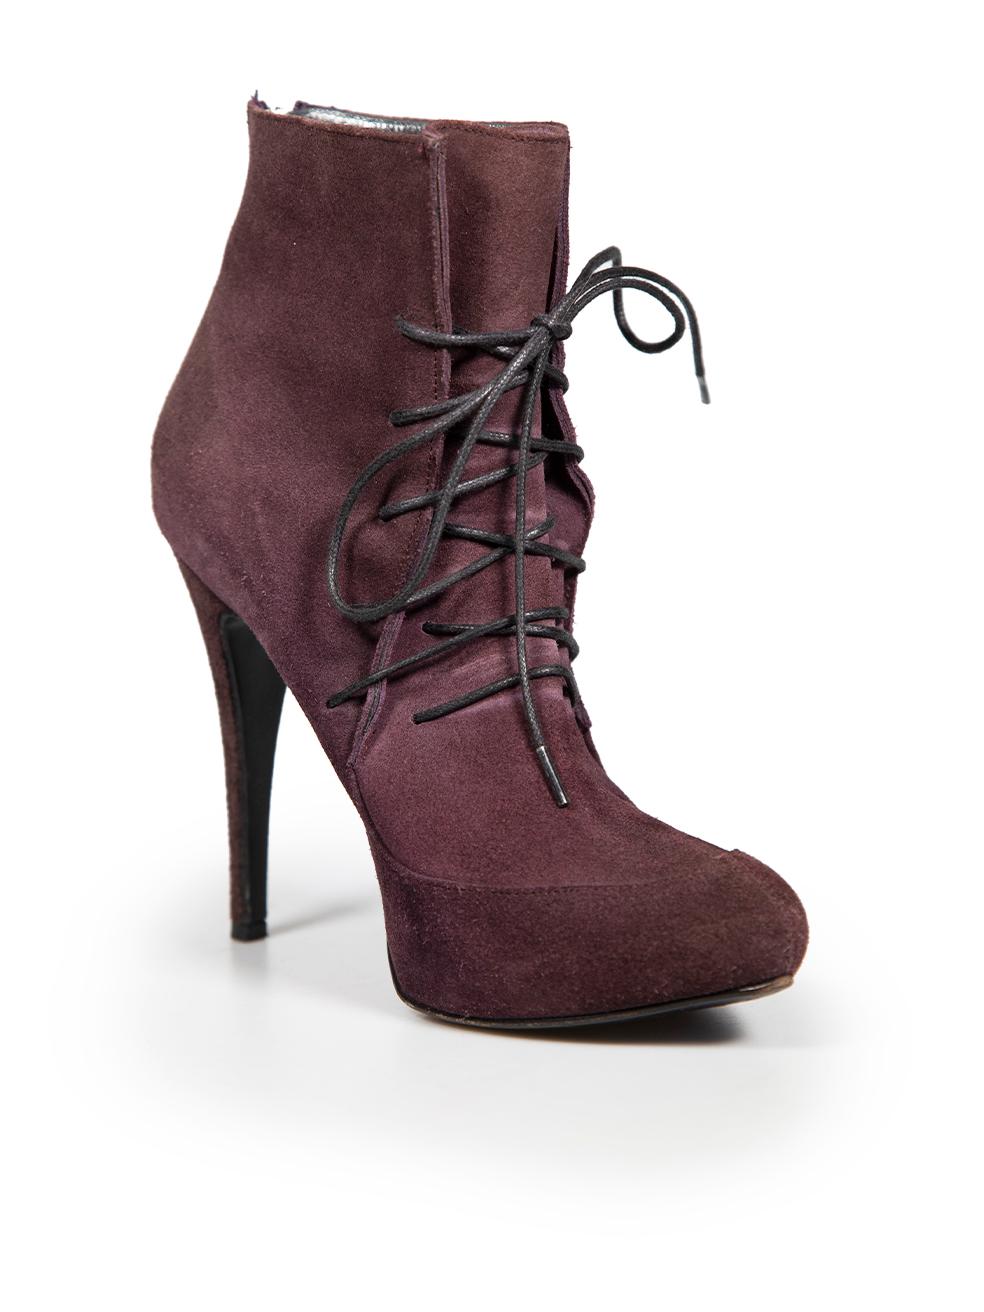 CONDITION is Very good. Minimal wear to boots is evident. Minimal wear to suede uppers and suede heels on this used Roberto Cavalli designer resale item.
 
 
 
 Details
 
 
 Purple
 
 Suede
 
 Ankle boots
 
 Pointed toe
 
 High heel
 
 Lace up